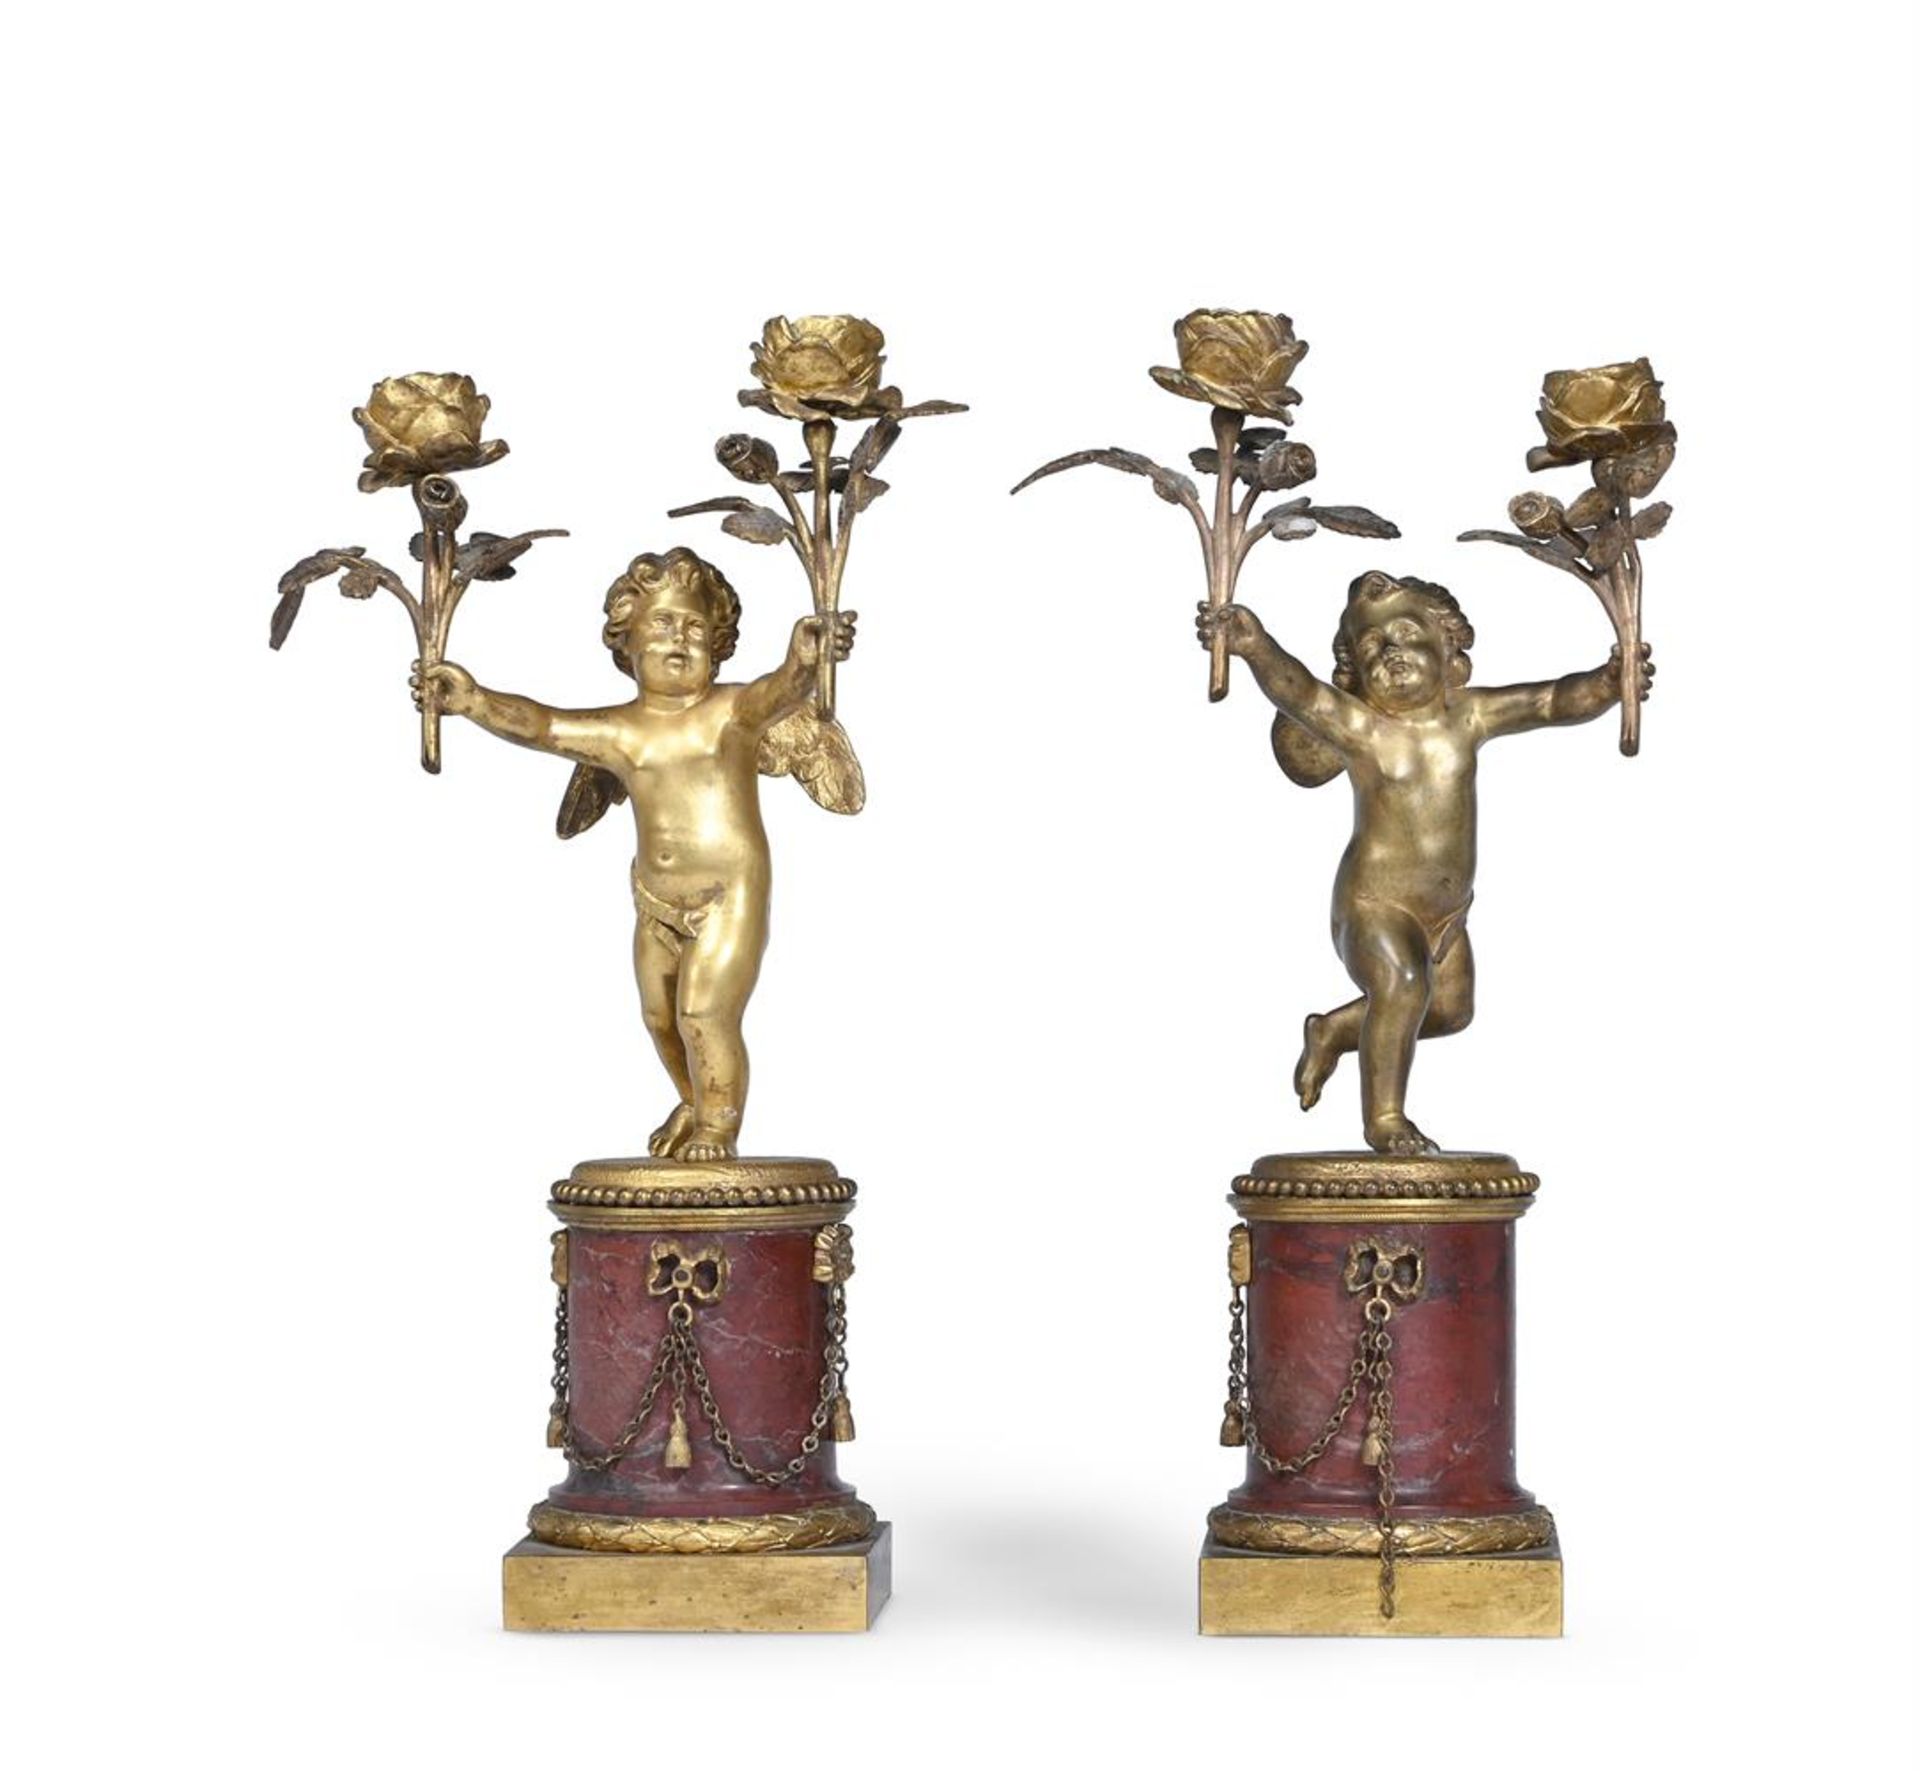 A PAIR OF GILT METAL CHERUB TWIN BRANCH CANDLESTICKS, FRENCH, MID TO LATE 19TH CENTURY - Image 2 of 2